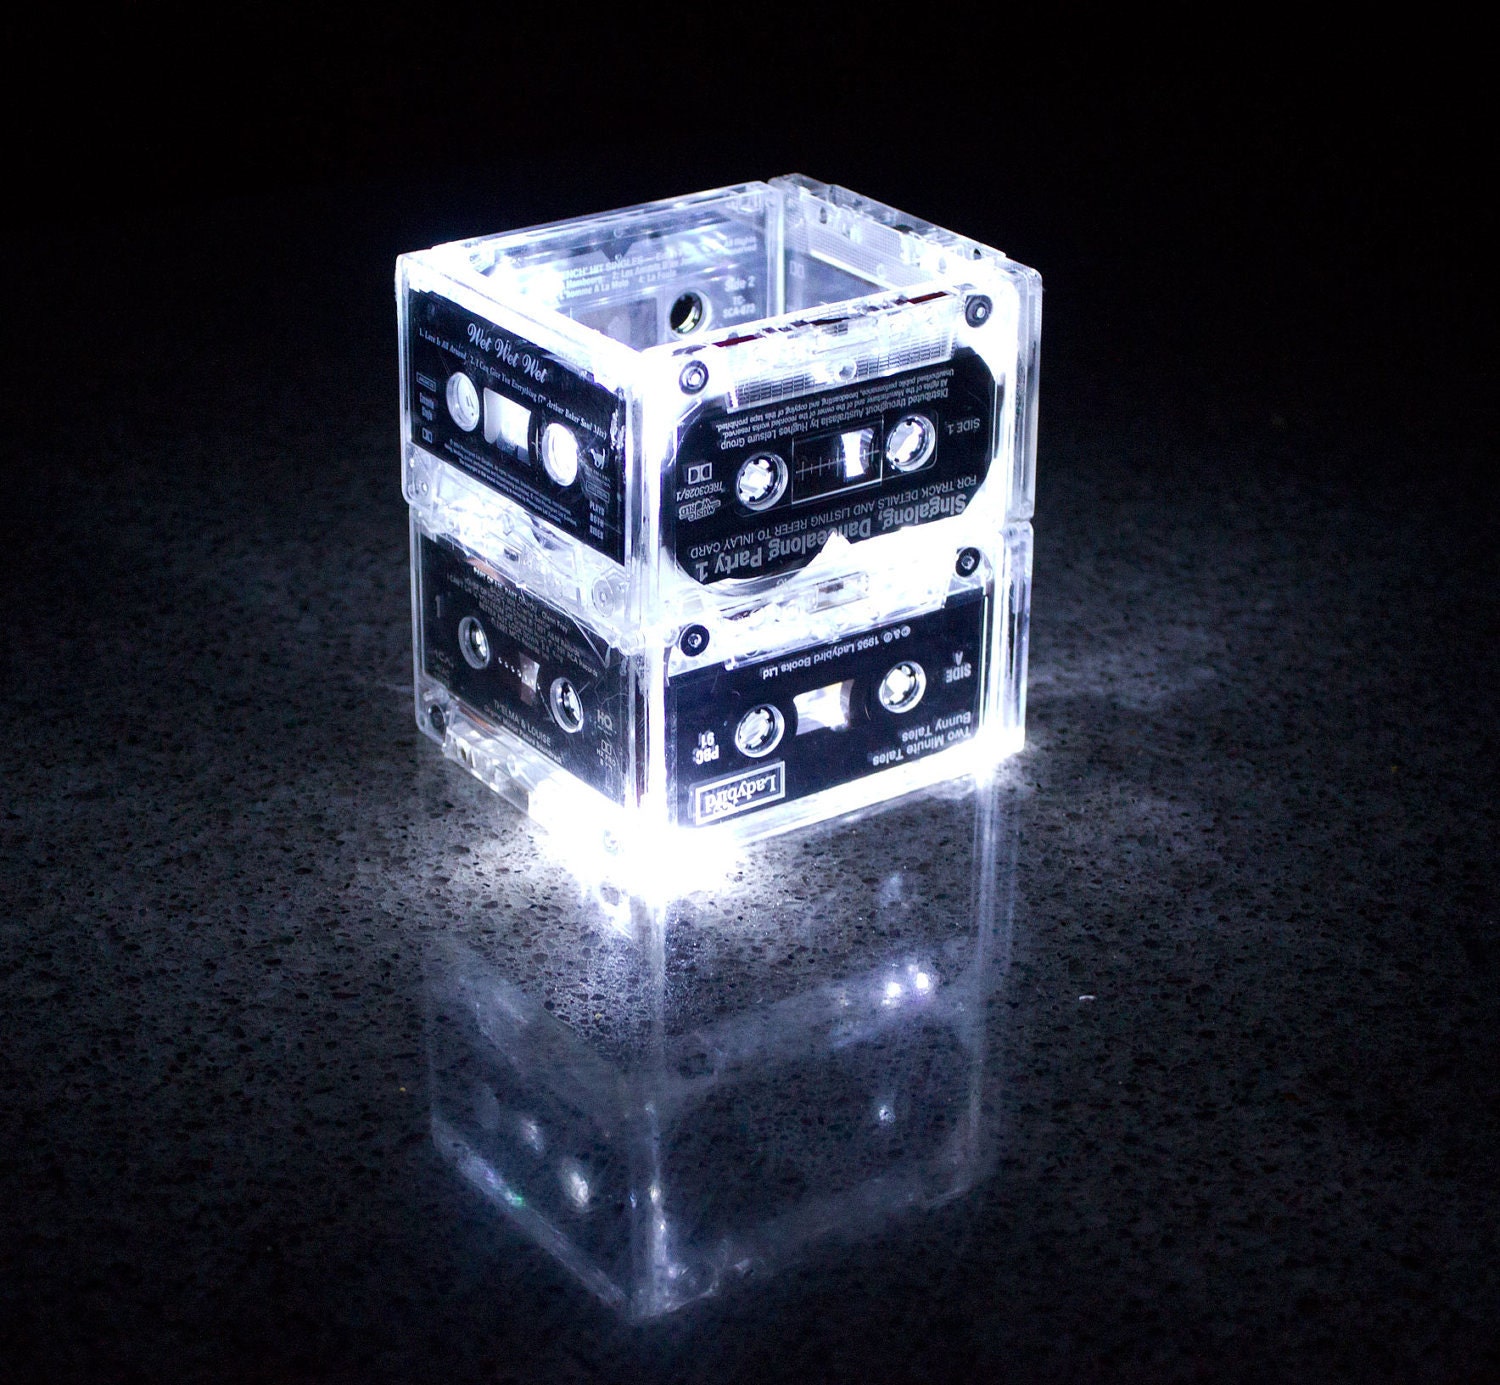 NIght Light Music cassette Tape Small - Upcycled Recycled Ecofriendly Wedding Table Setting